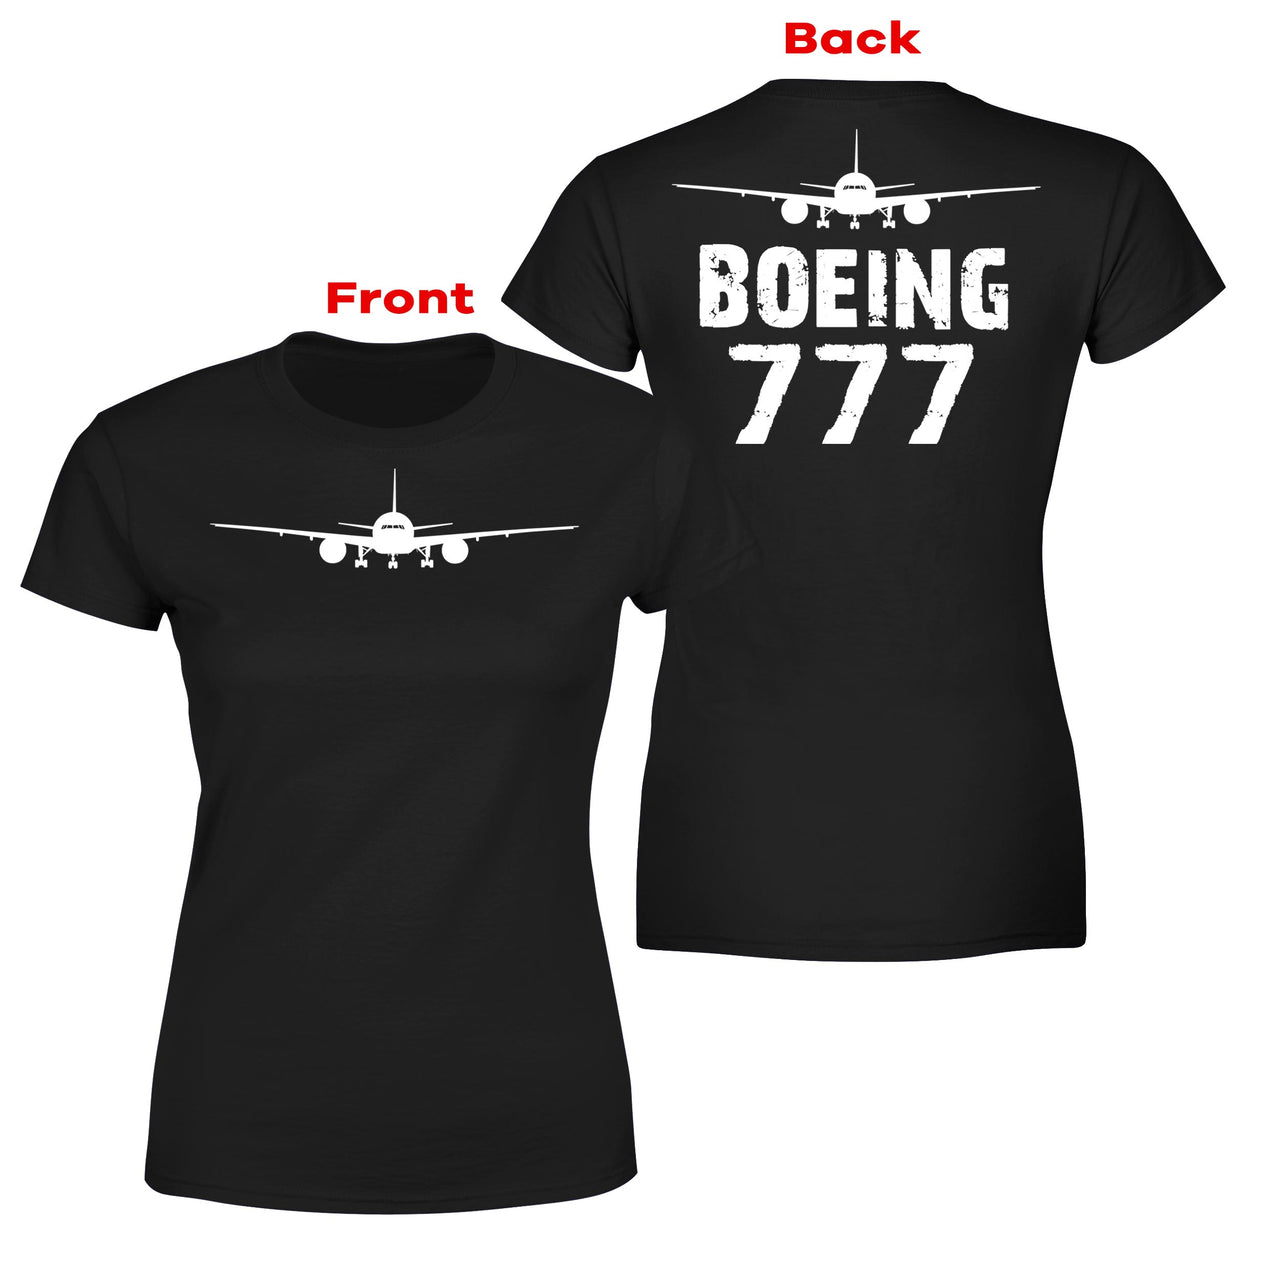 Boeing 777 & Plane Designed Double-Side T-Shirts